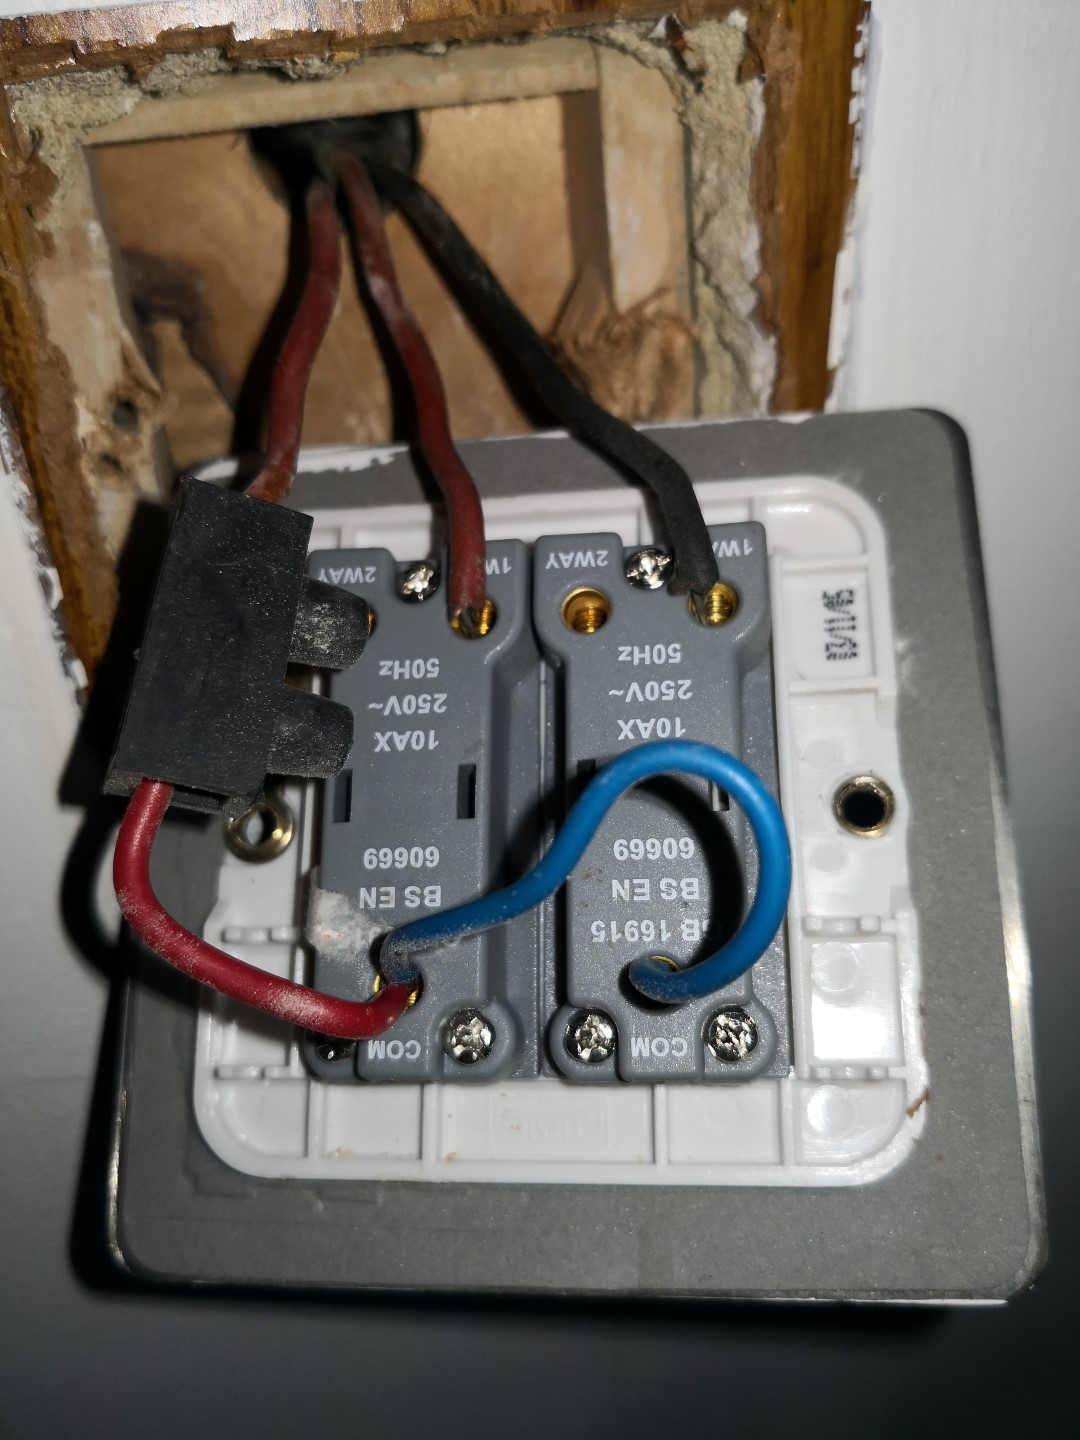 Wiring A Two Way Light Switch With Double Switch Wiring Diagram And